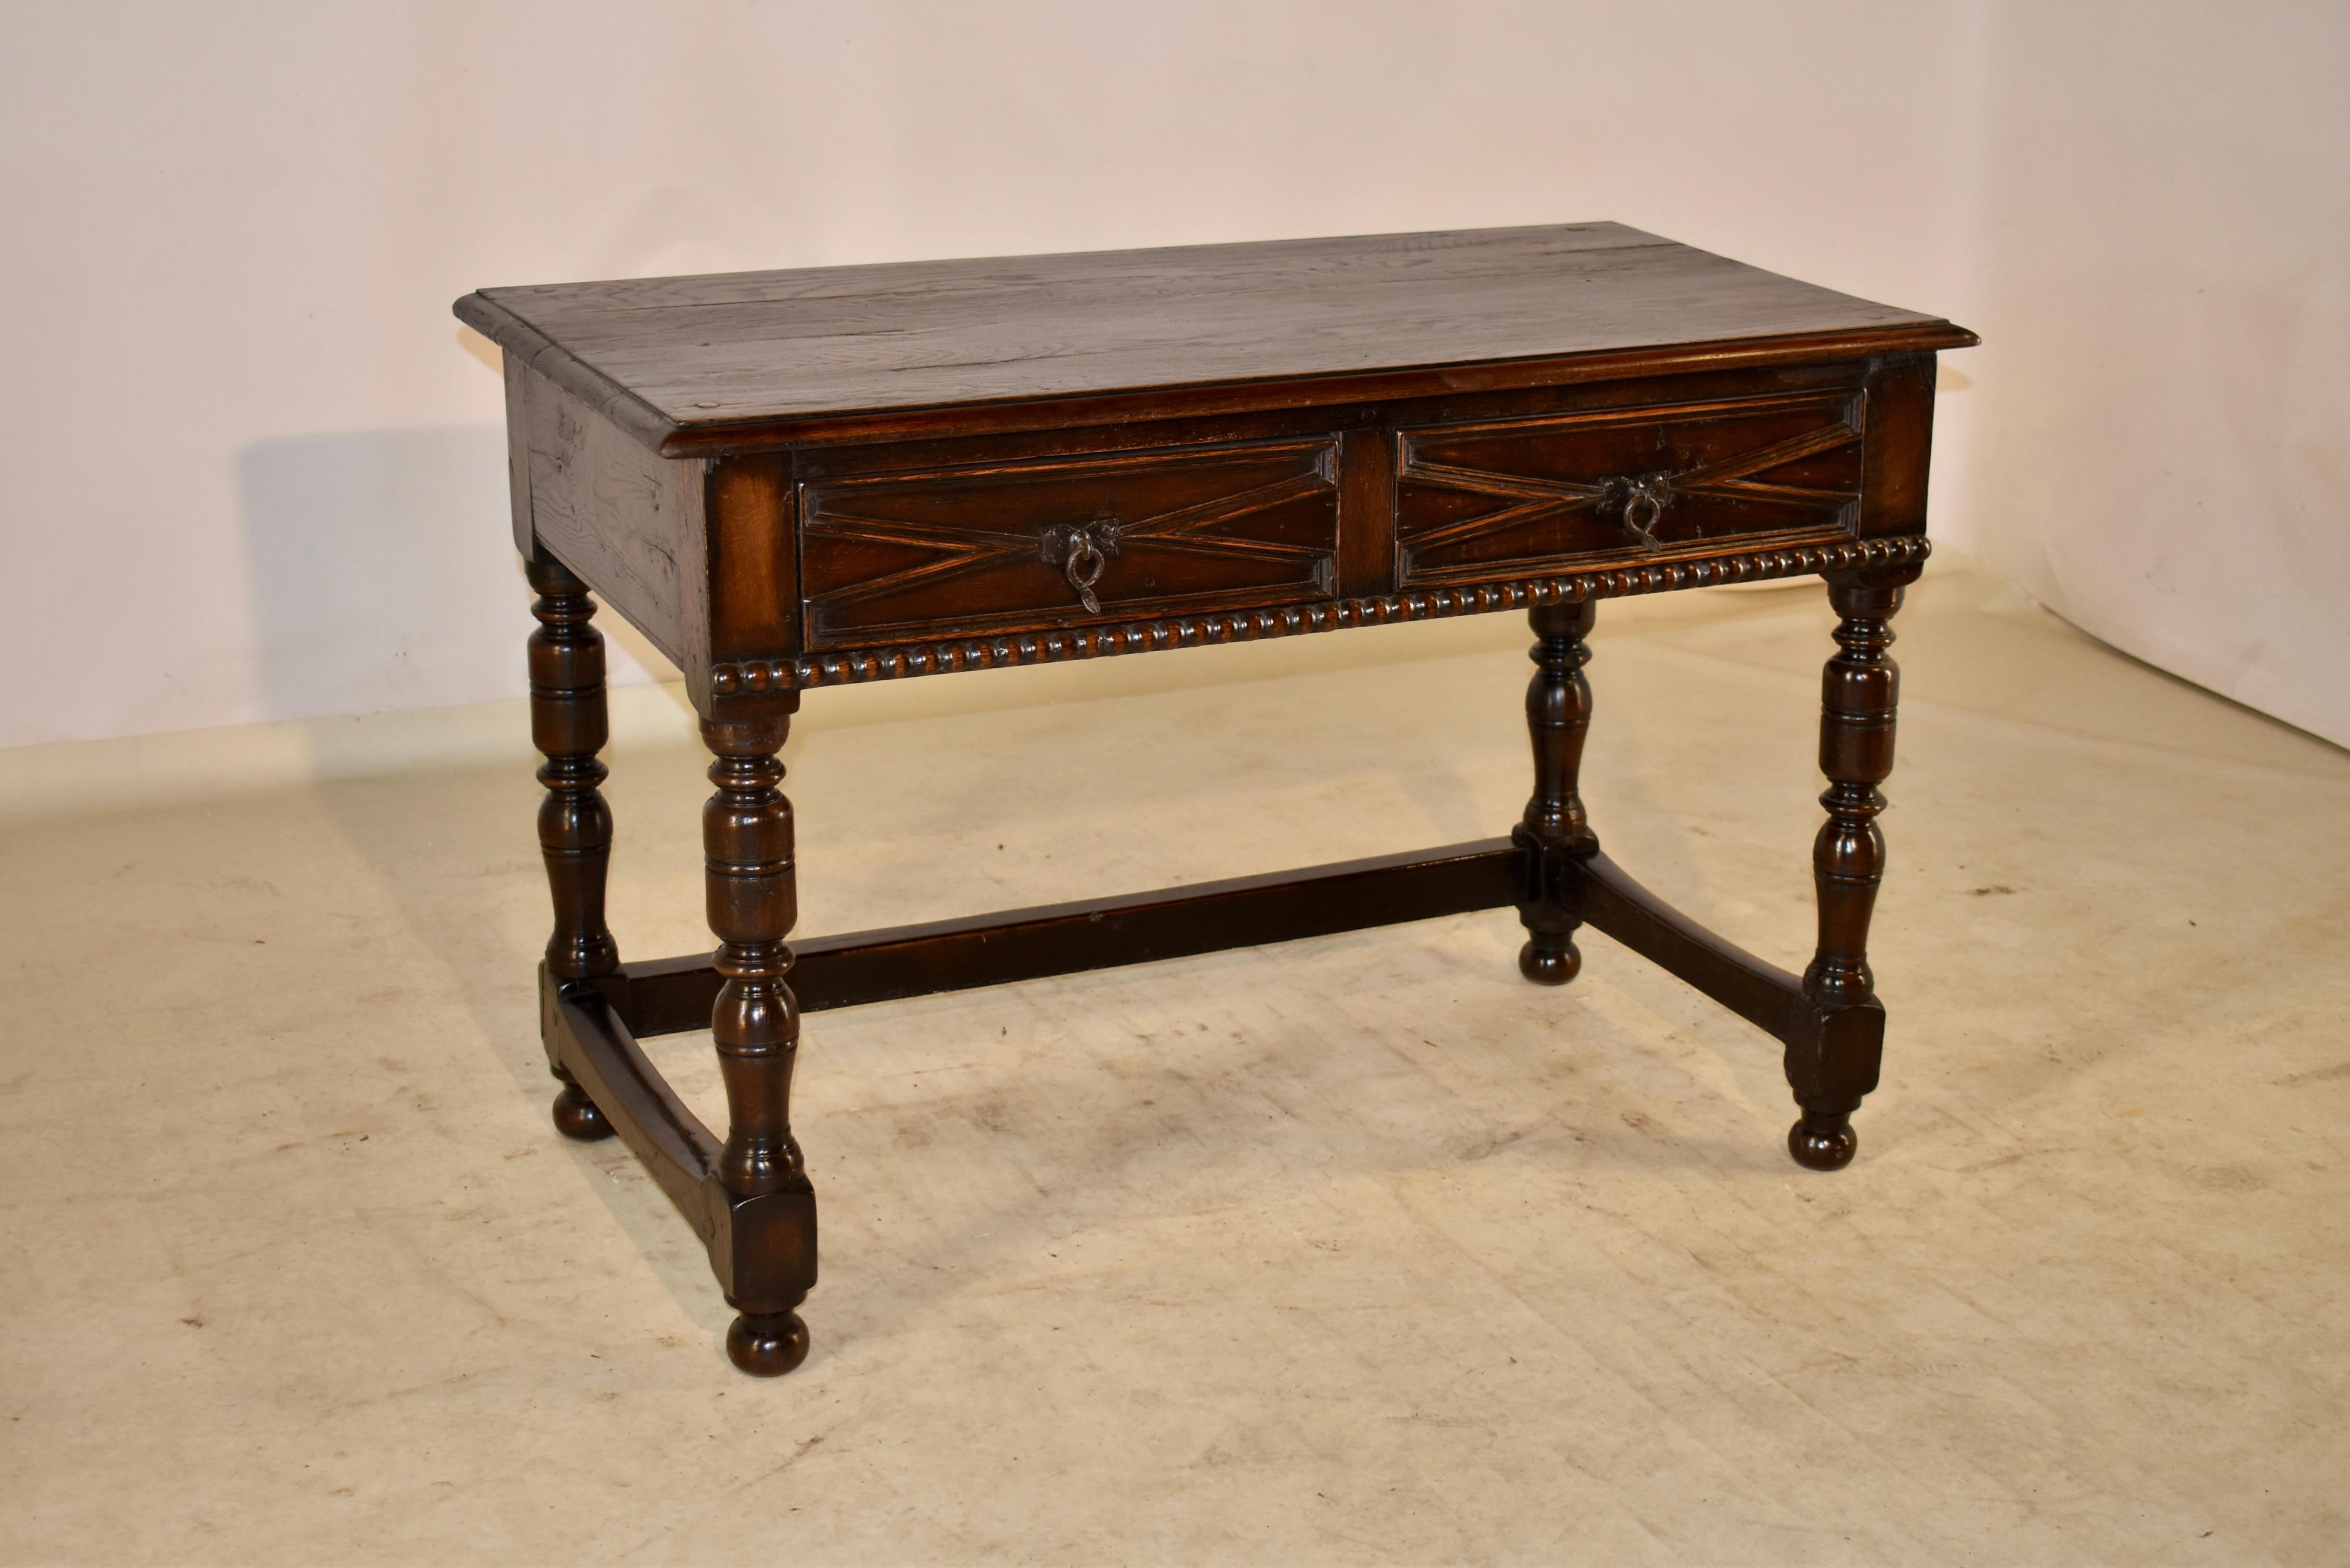 19th century elm and oak writing table from England with a lovely grained elm top which has a beveled edge, following down to elm sides, which also have rich graining. The front of the table retains two original drawers with the most charming hand